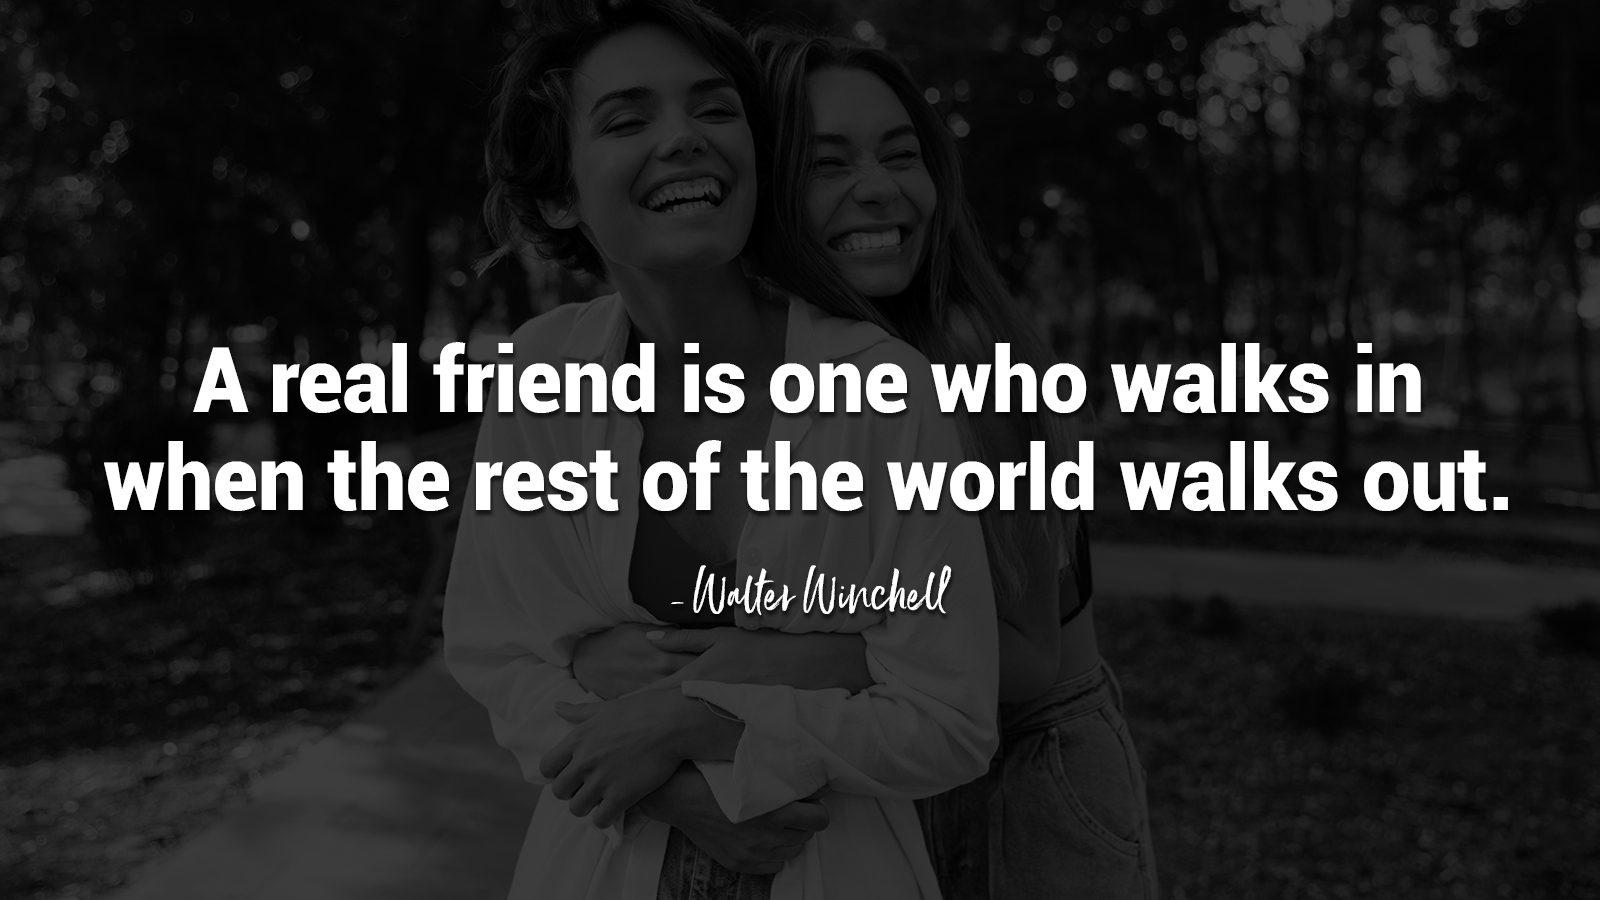 15 Quotes to Appreciate Your Forever Best Friend